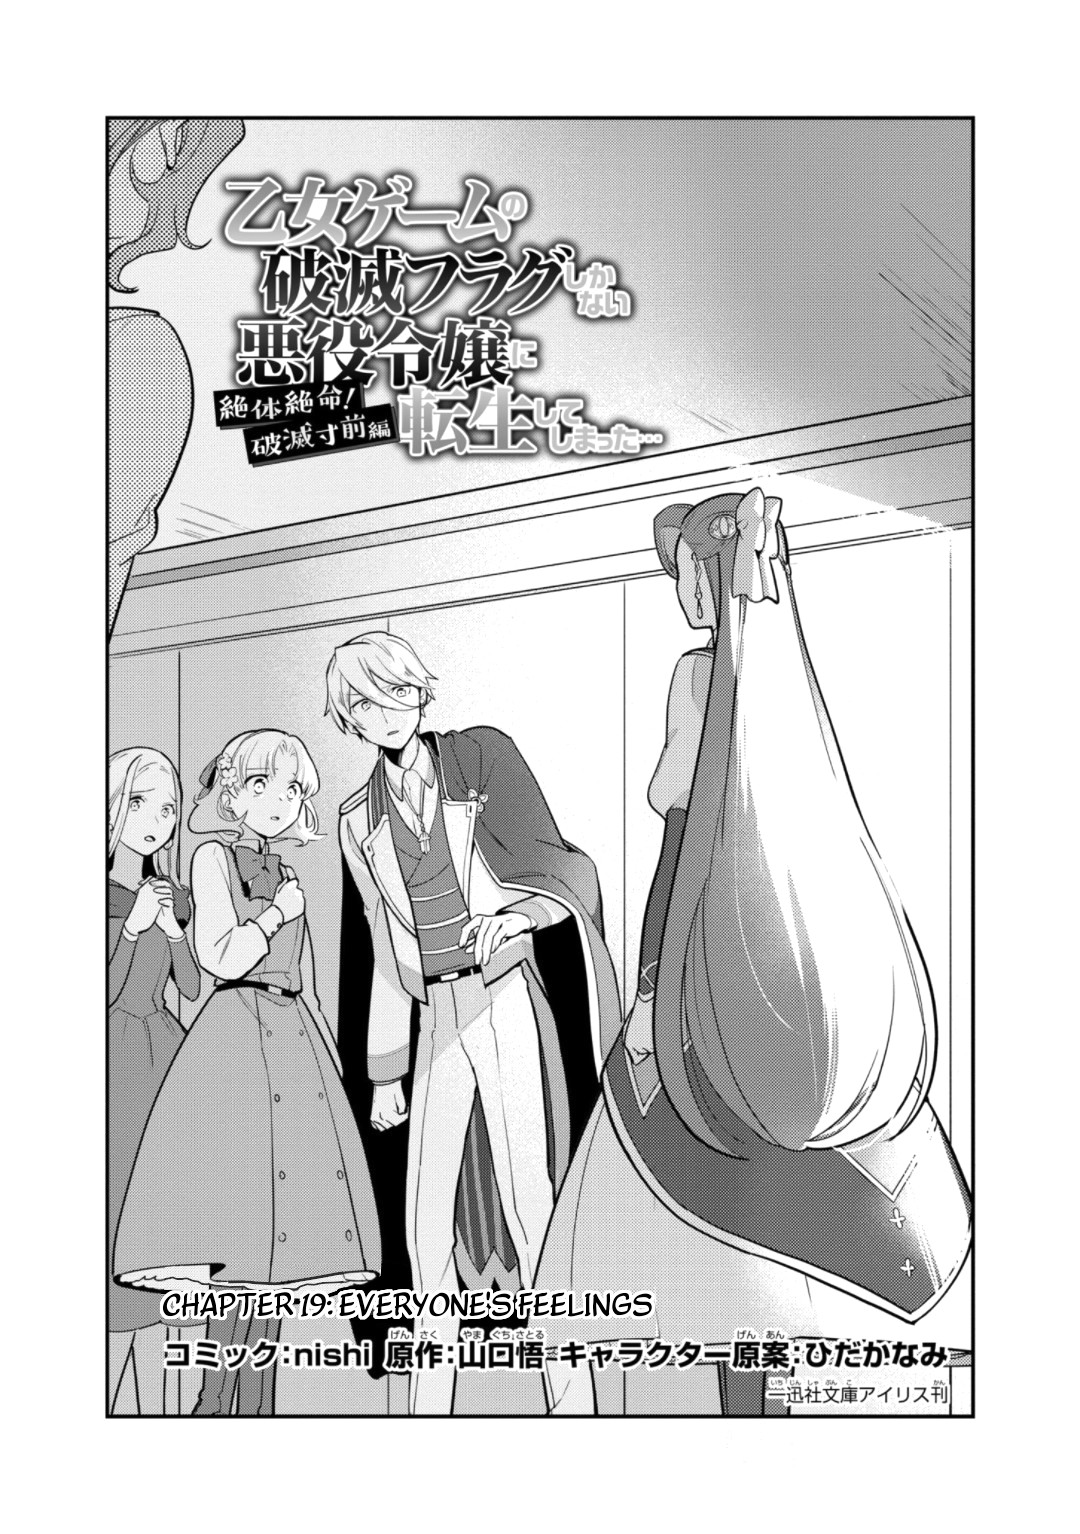 I Reincarnated Into An Otome Game As A Villainess With Only Destruction Flags... In A Dire Situation!? Verge Of Destruction Arc Chapter 19: Everyone's Feelings - Picture 2